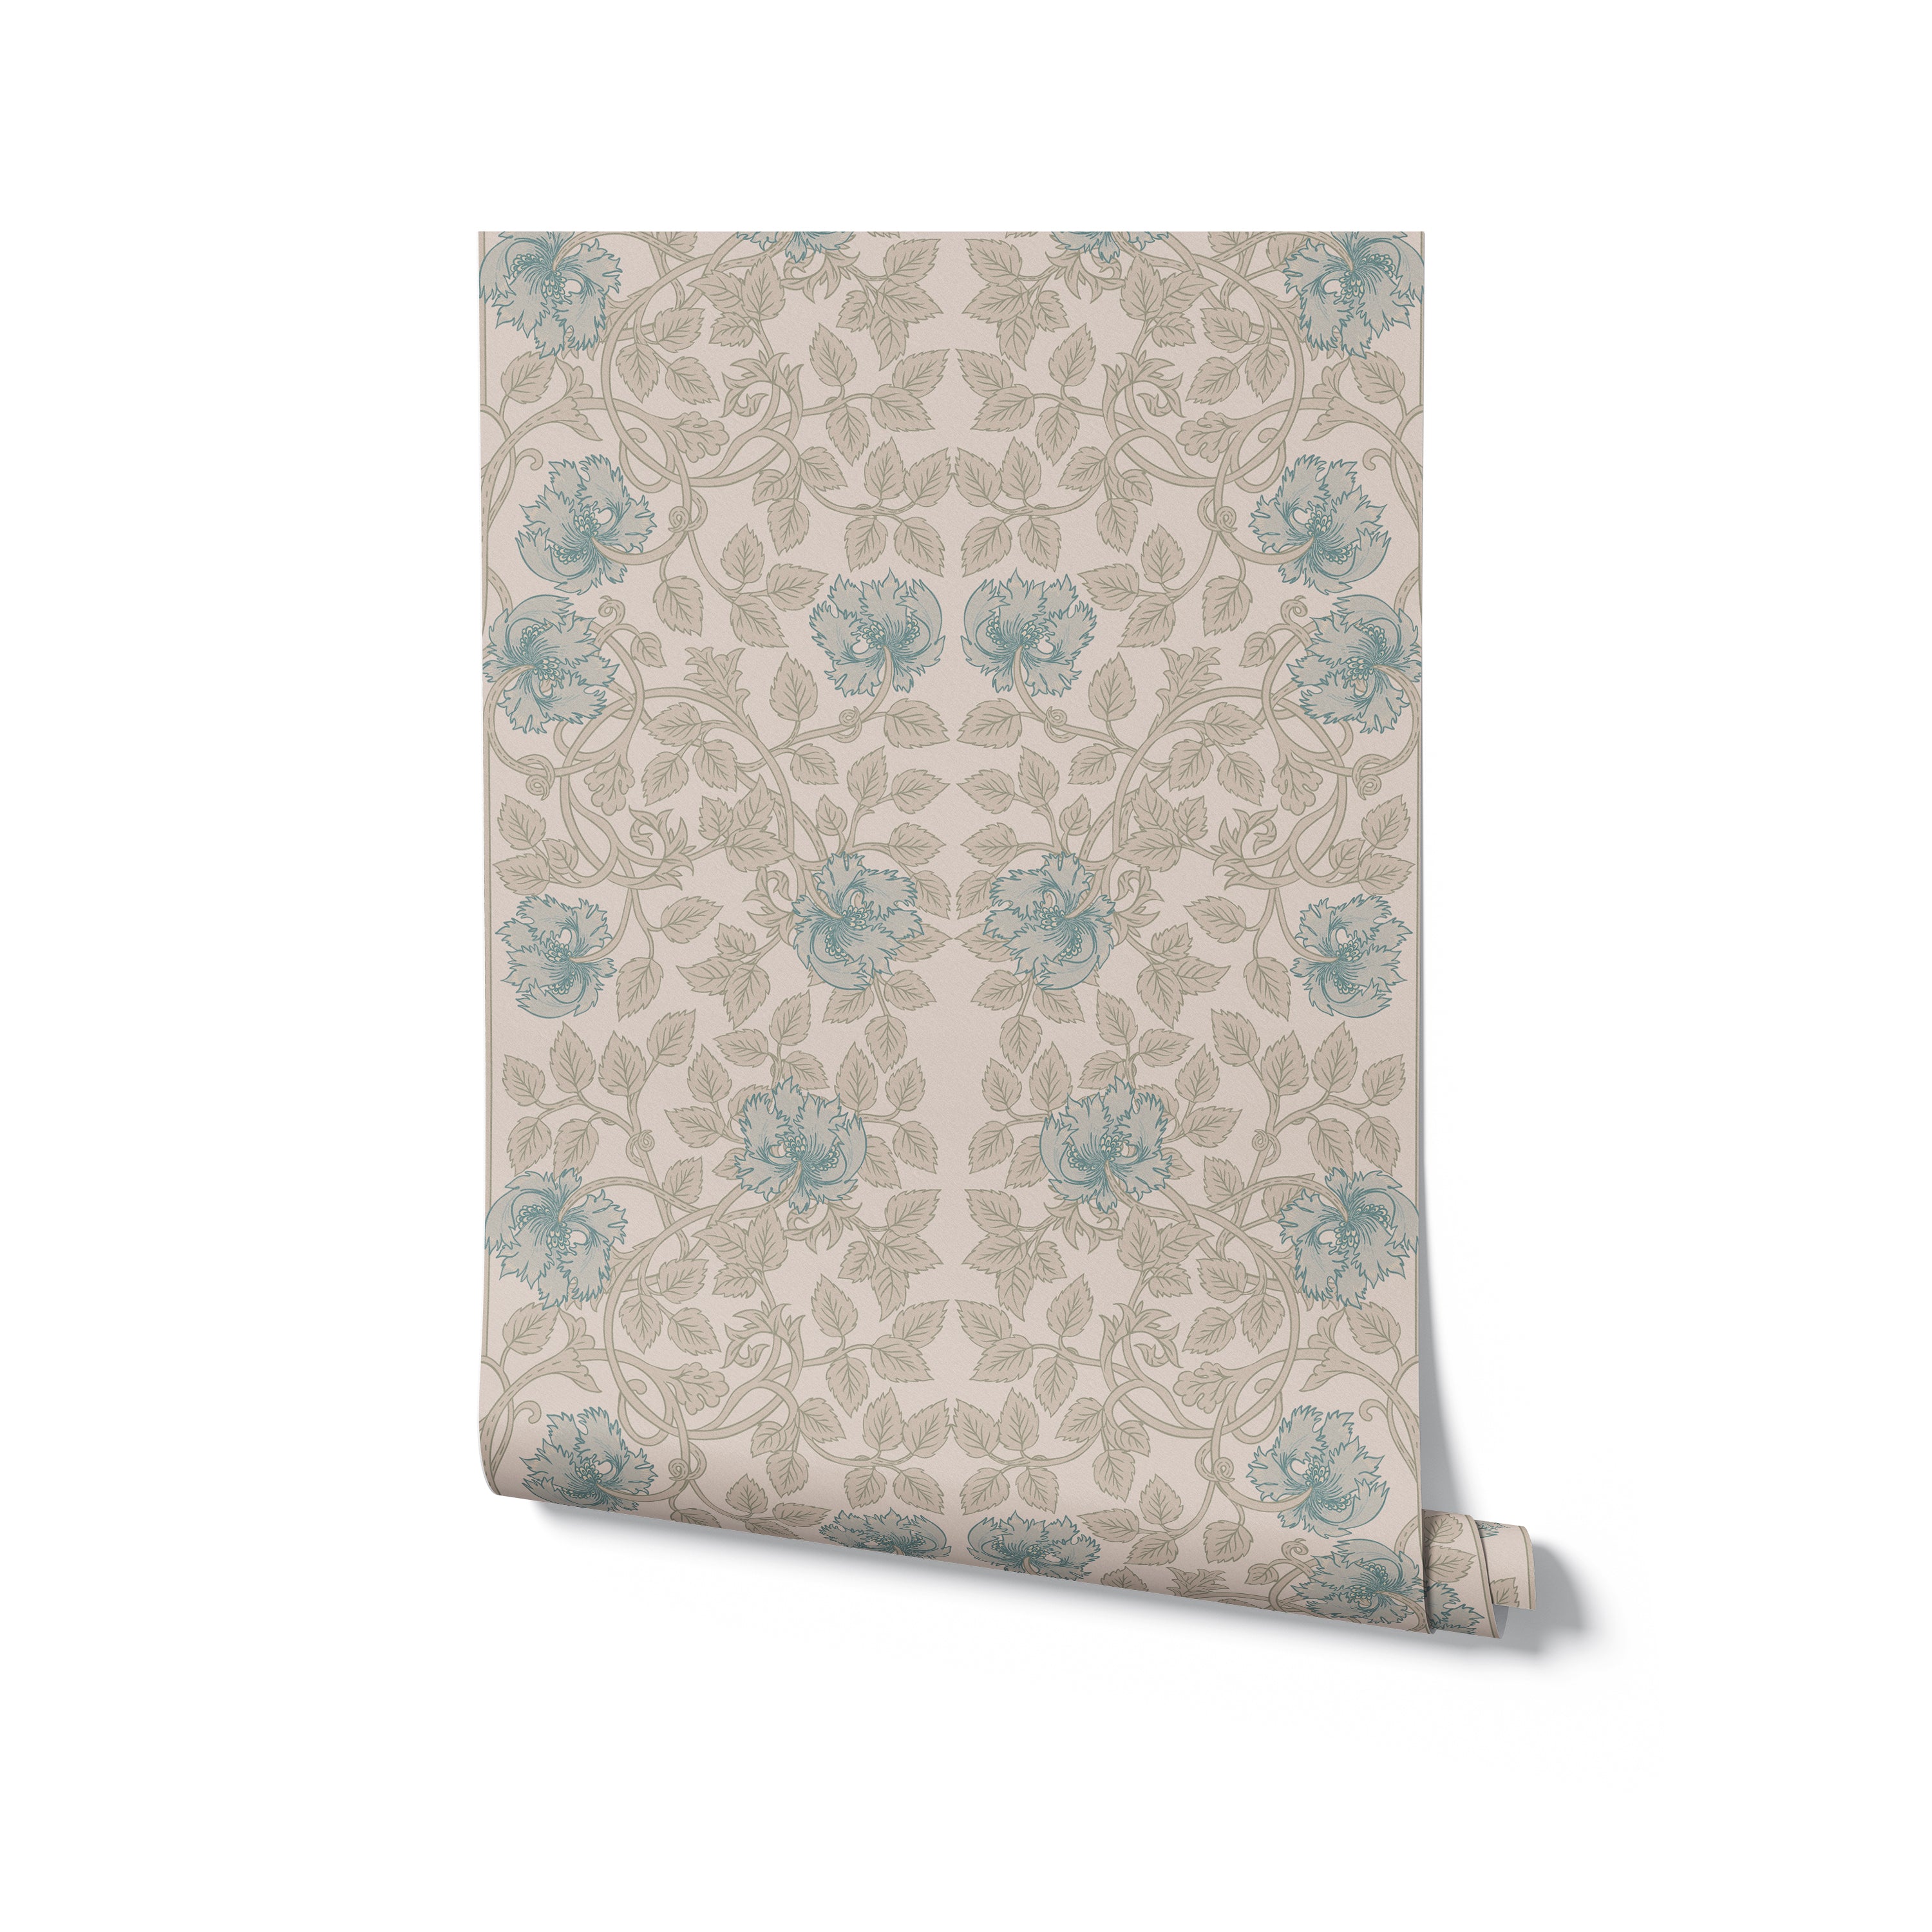 A roll of Color Burn Damask Wallpaper, featuring ornate floral and leaf patterns in teal and beige. The wallpaper roll is depicted standing against a plain background, highlighting the elegance of the design